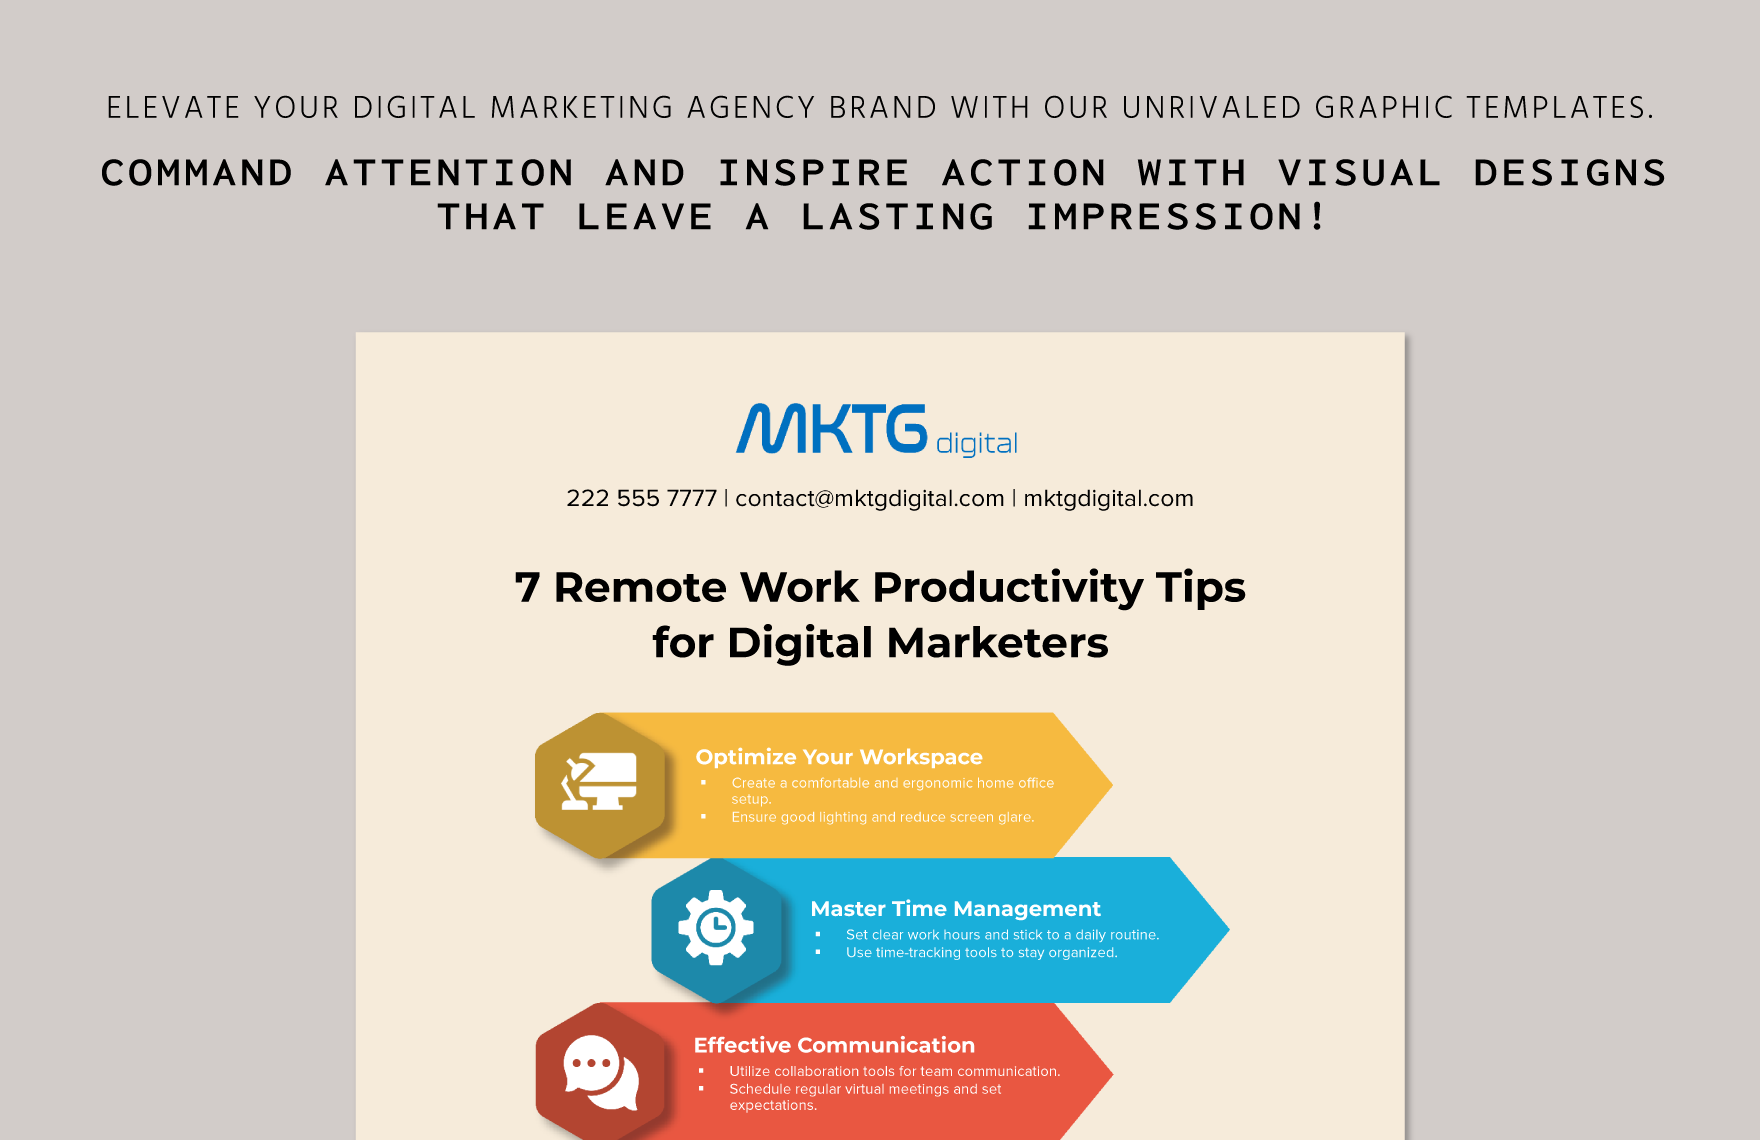 Digital Marketing Agency Remote Work Productivity Tips Infographic Template